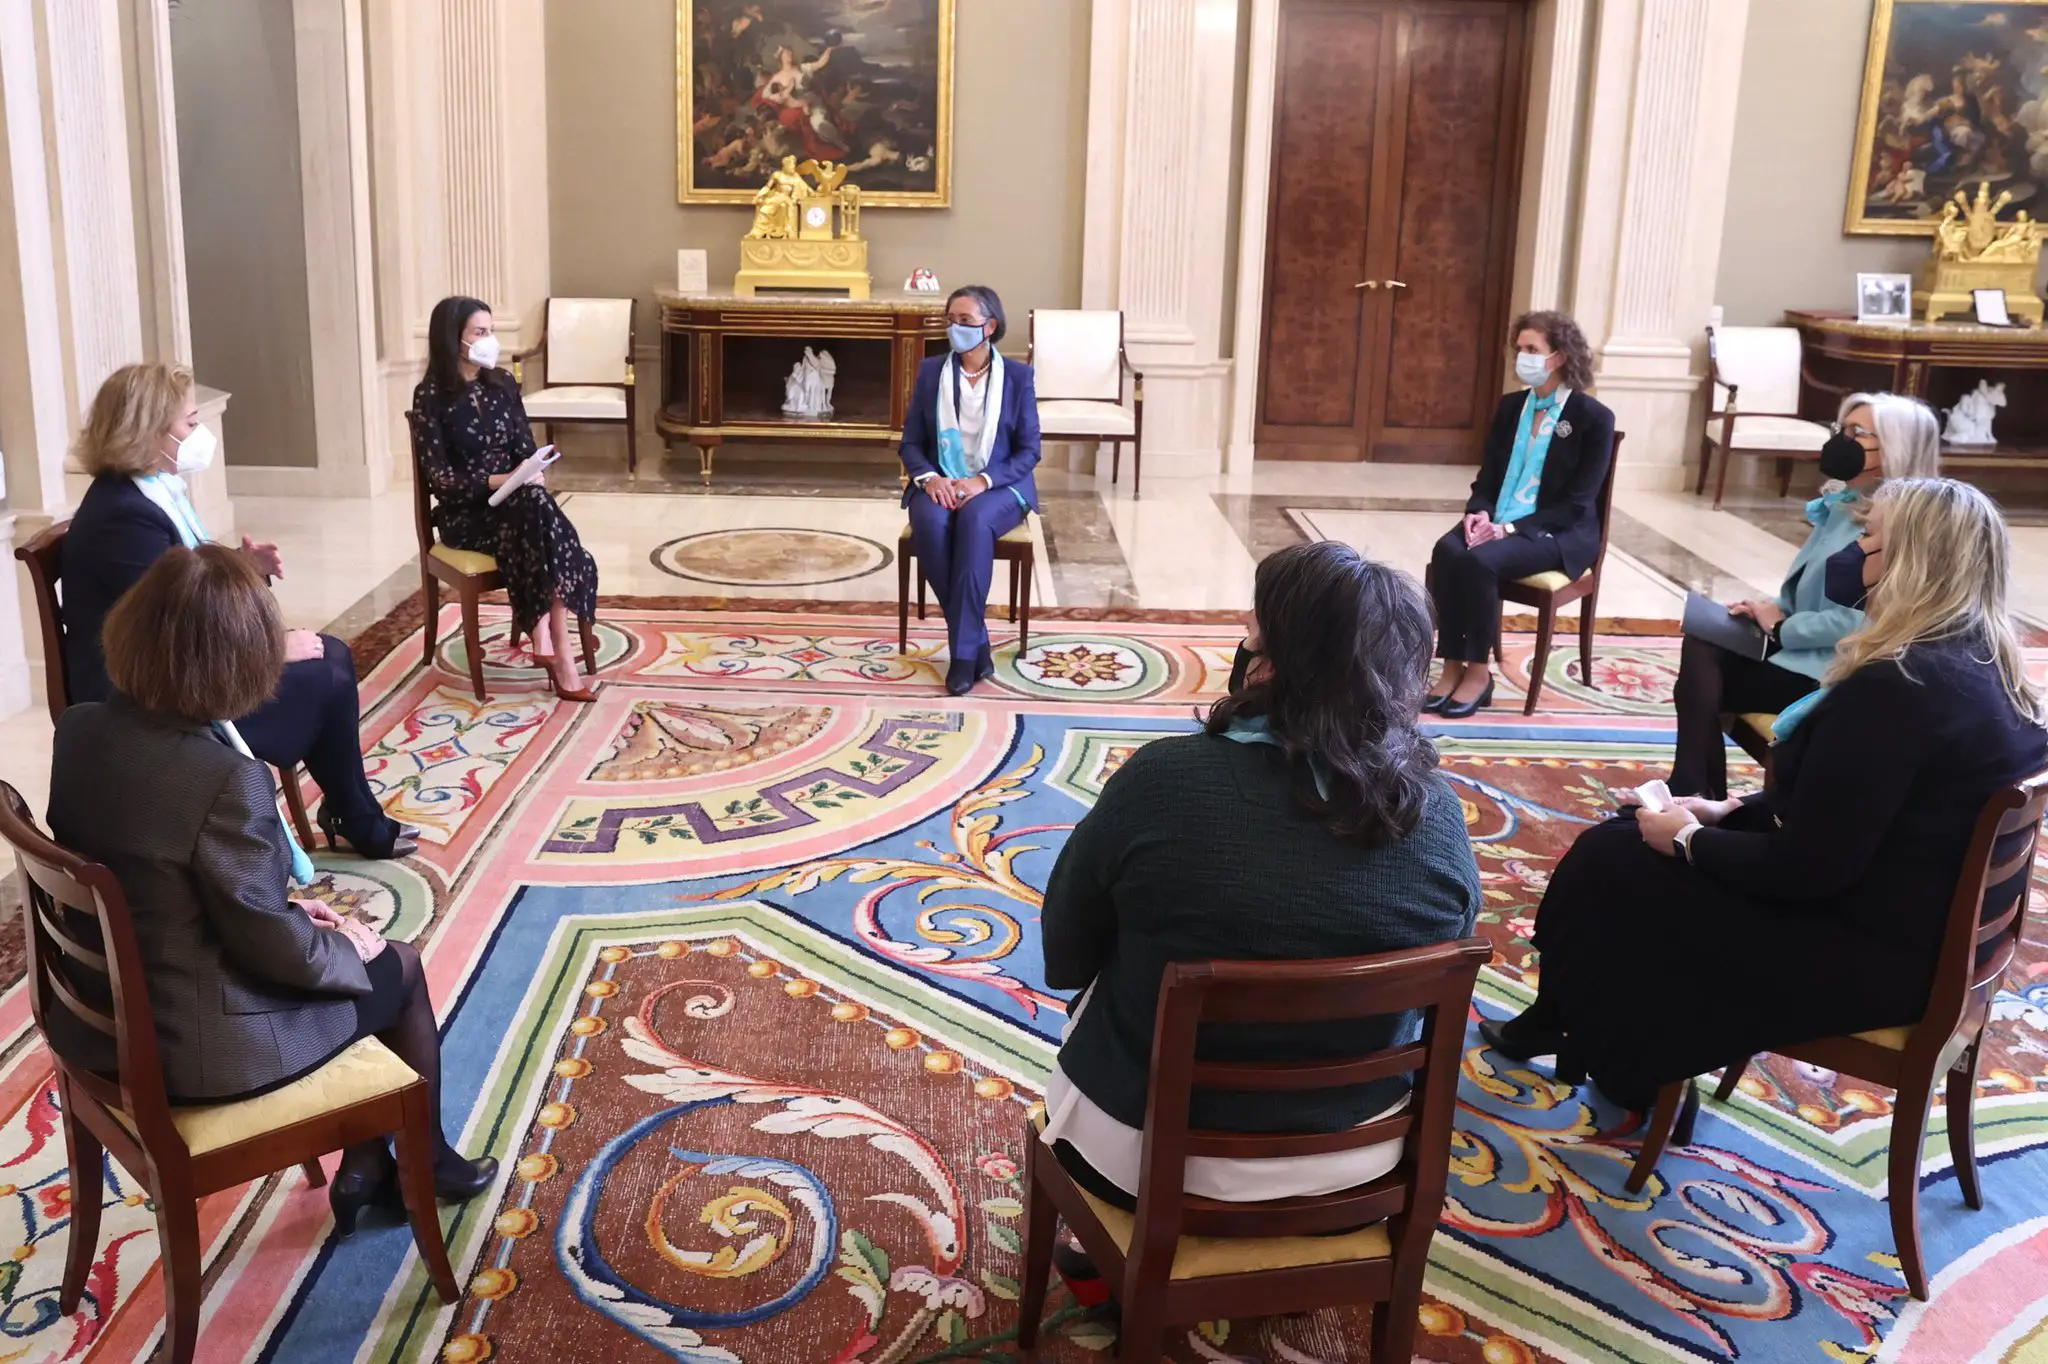 The president of ASEME, Eva Serrano, also informed the Queen about the process of joining the business associations of the entire Community of Madrid